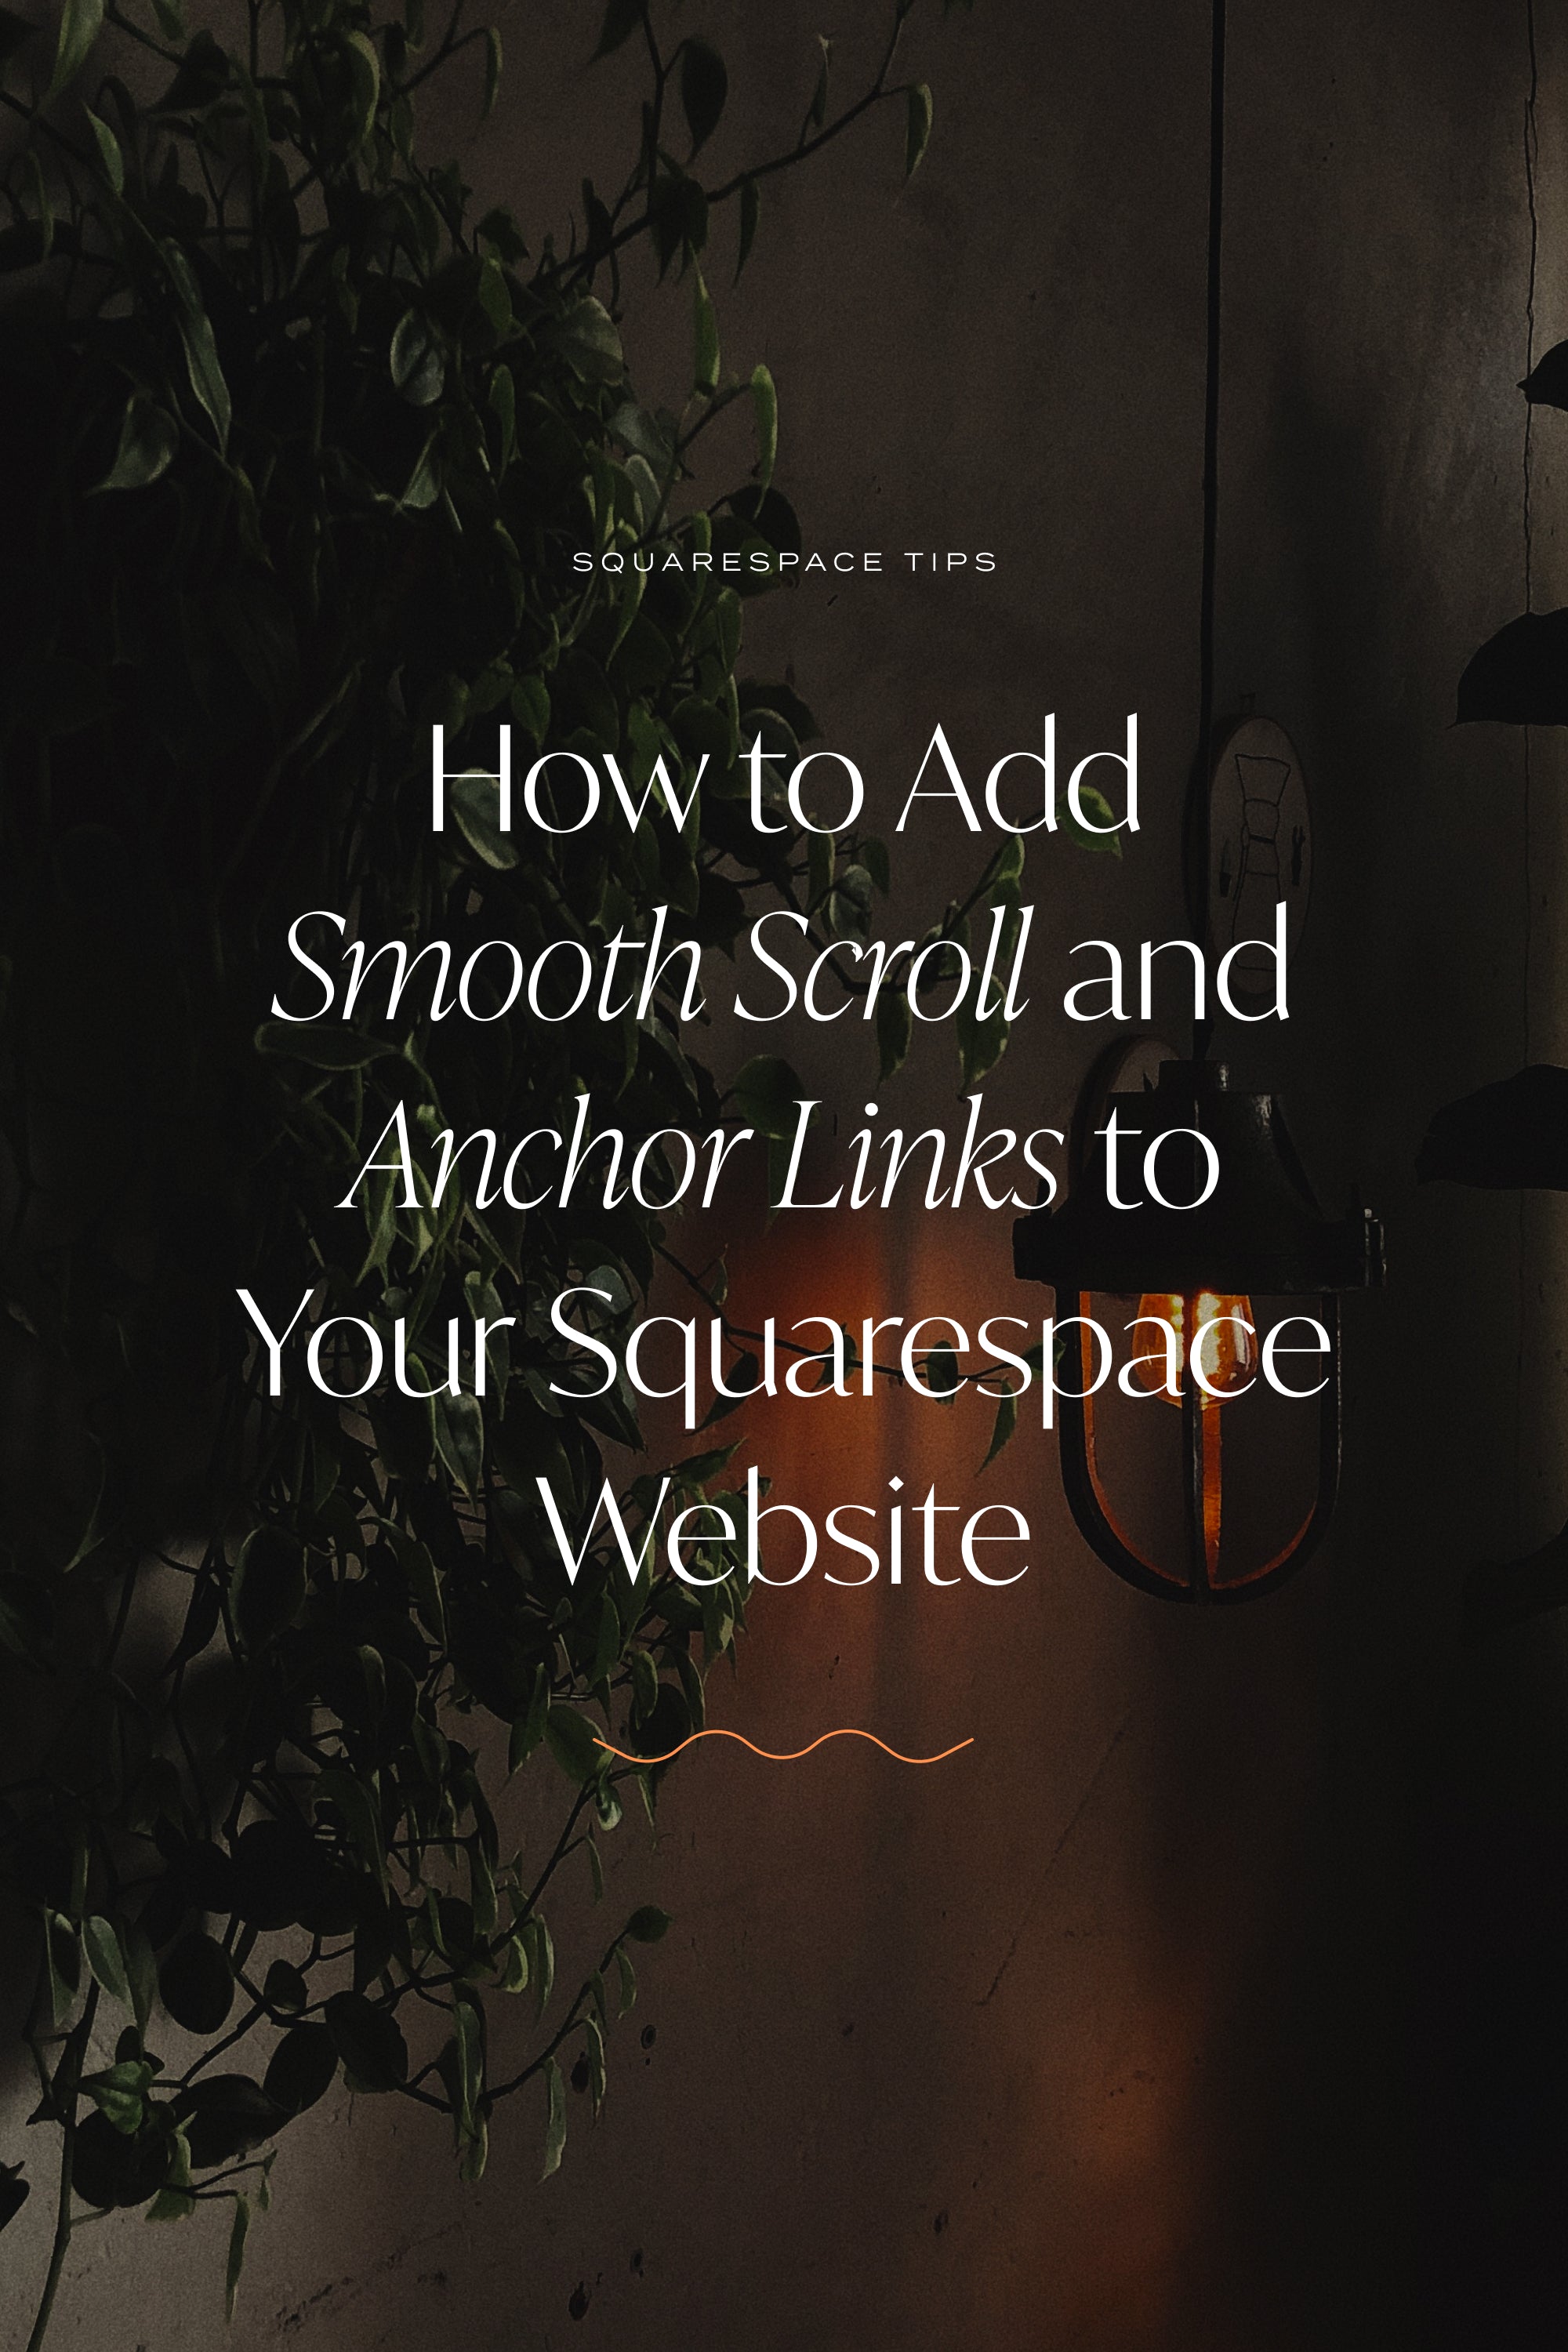 How to Add Smooth Scroll and Anchor Links to Your Squarespace Website